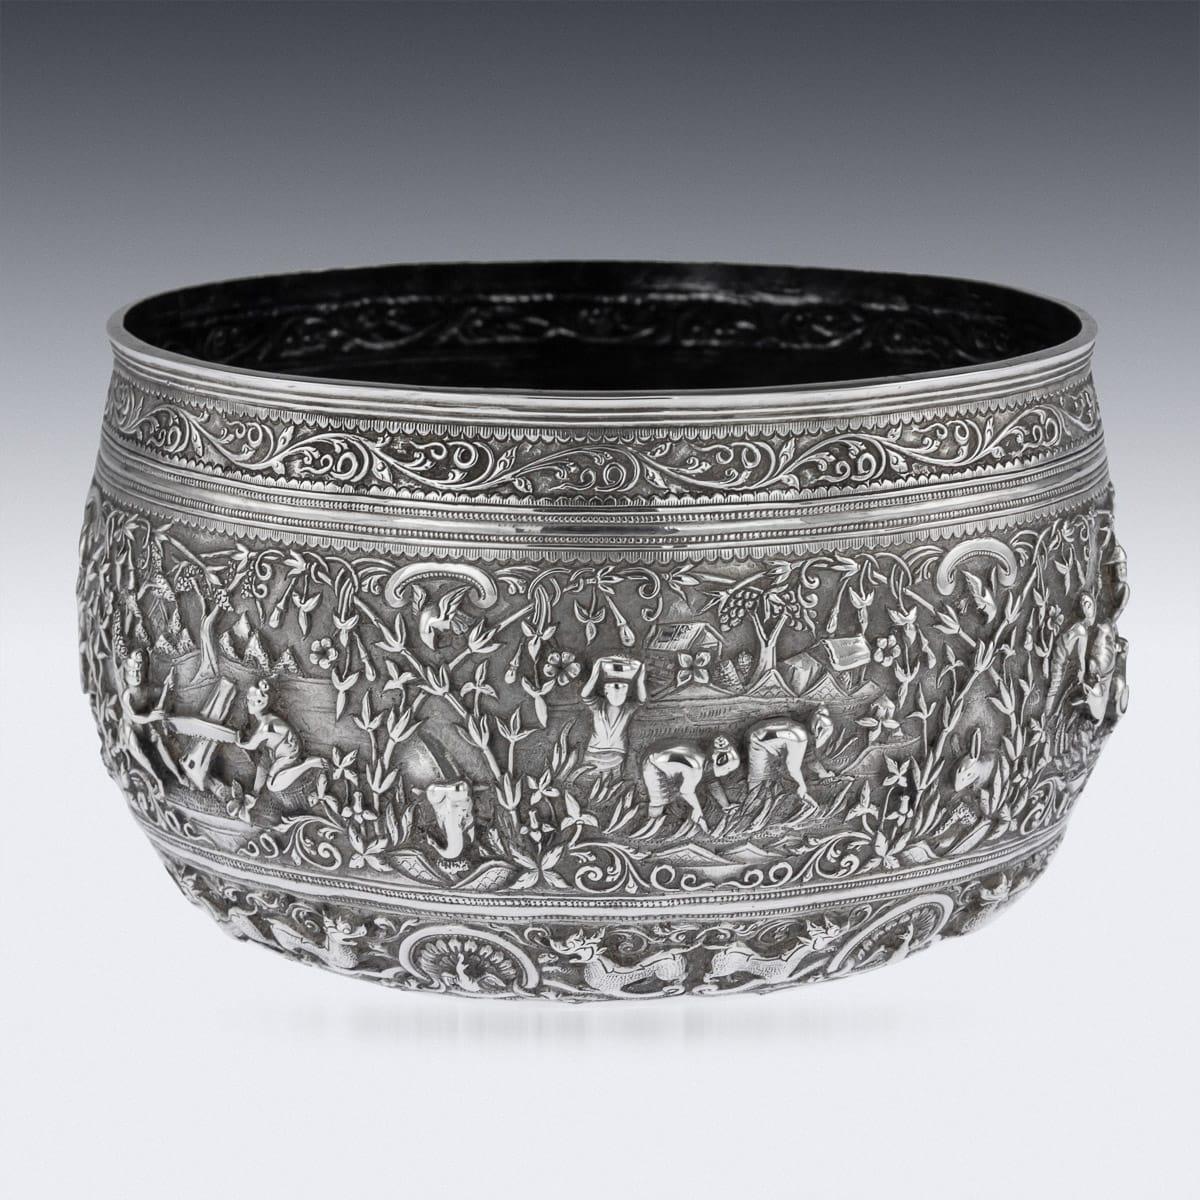 Antique late 19th century Burmese (Myanmar) outstanding solid silver repousse' bowl, repousse' decorated in high detail and relief with scenes of agriculture, villagers sailing, villagers sawing wood, transporting goods with two water buffalo,